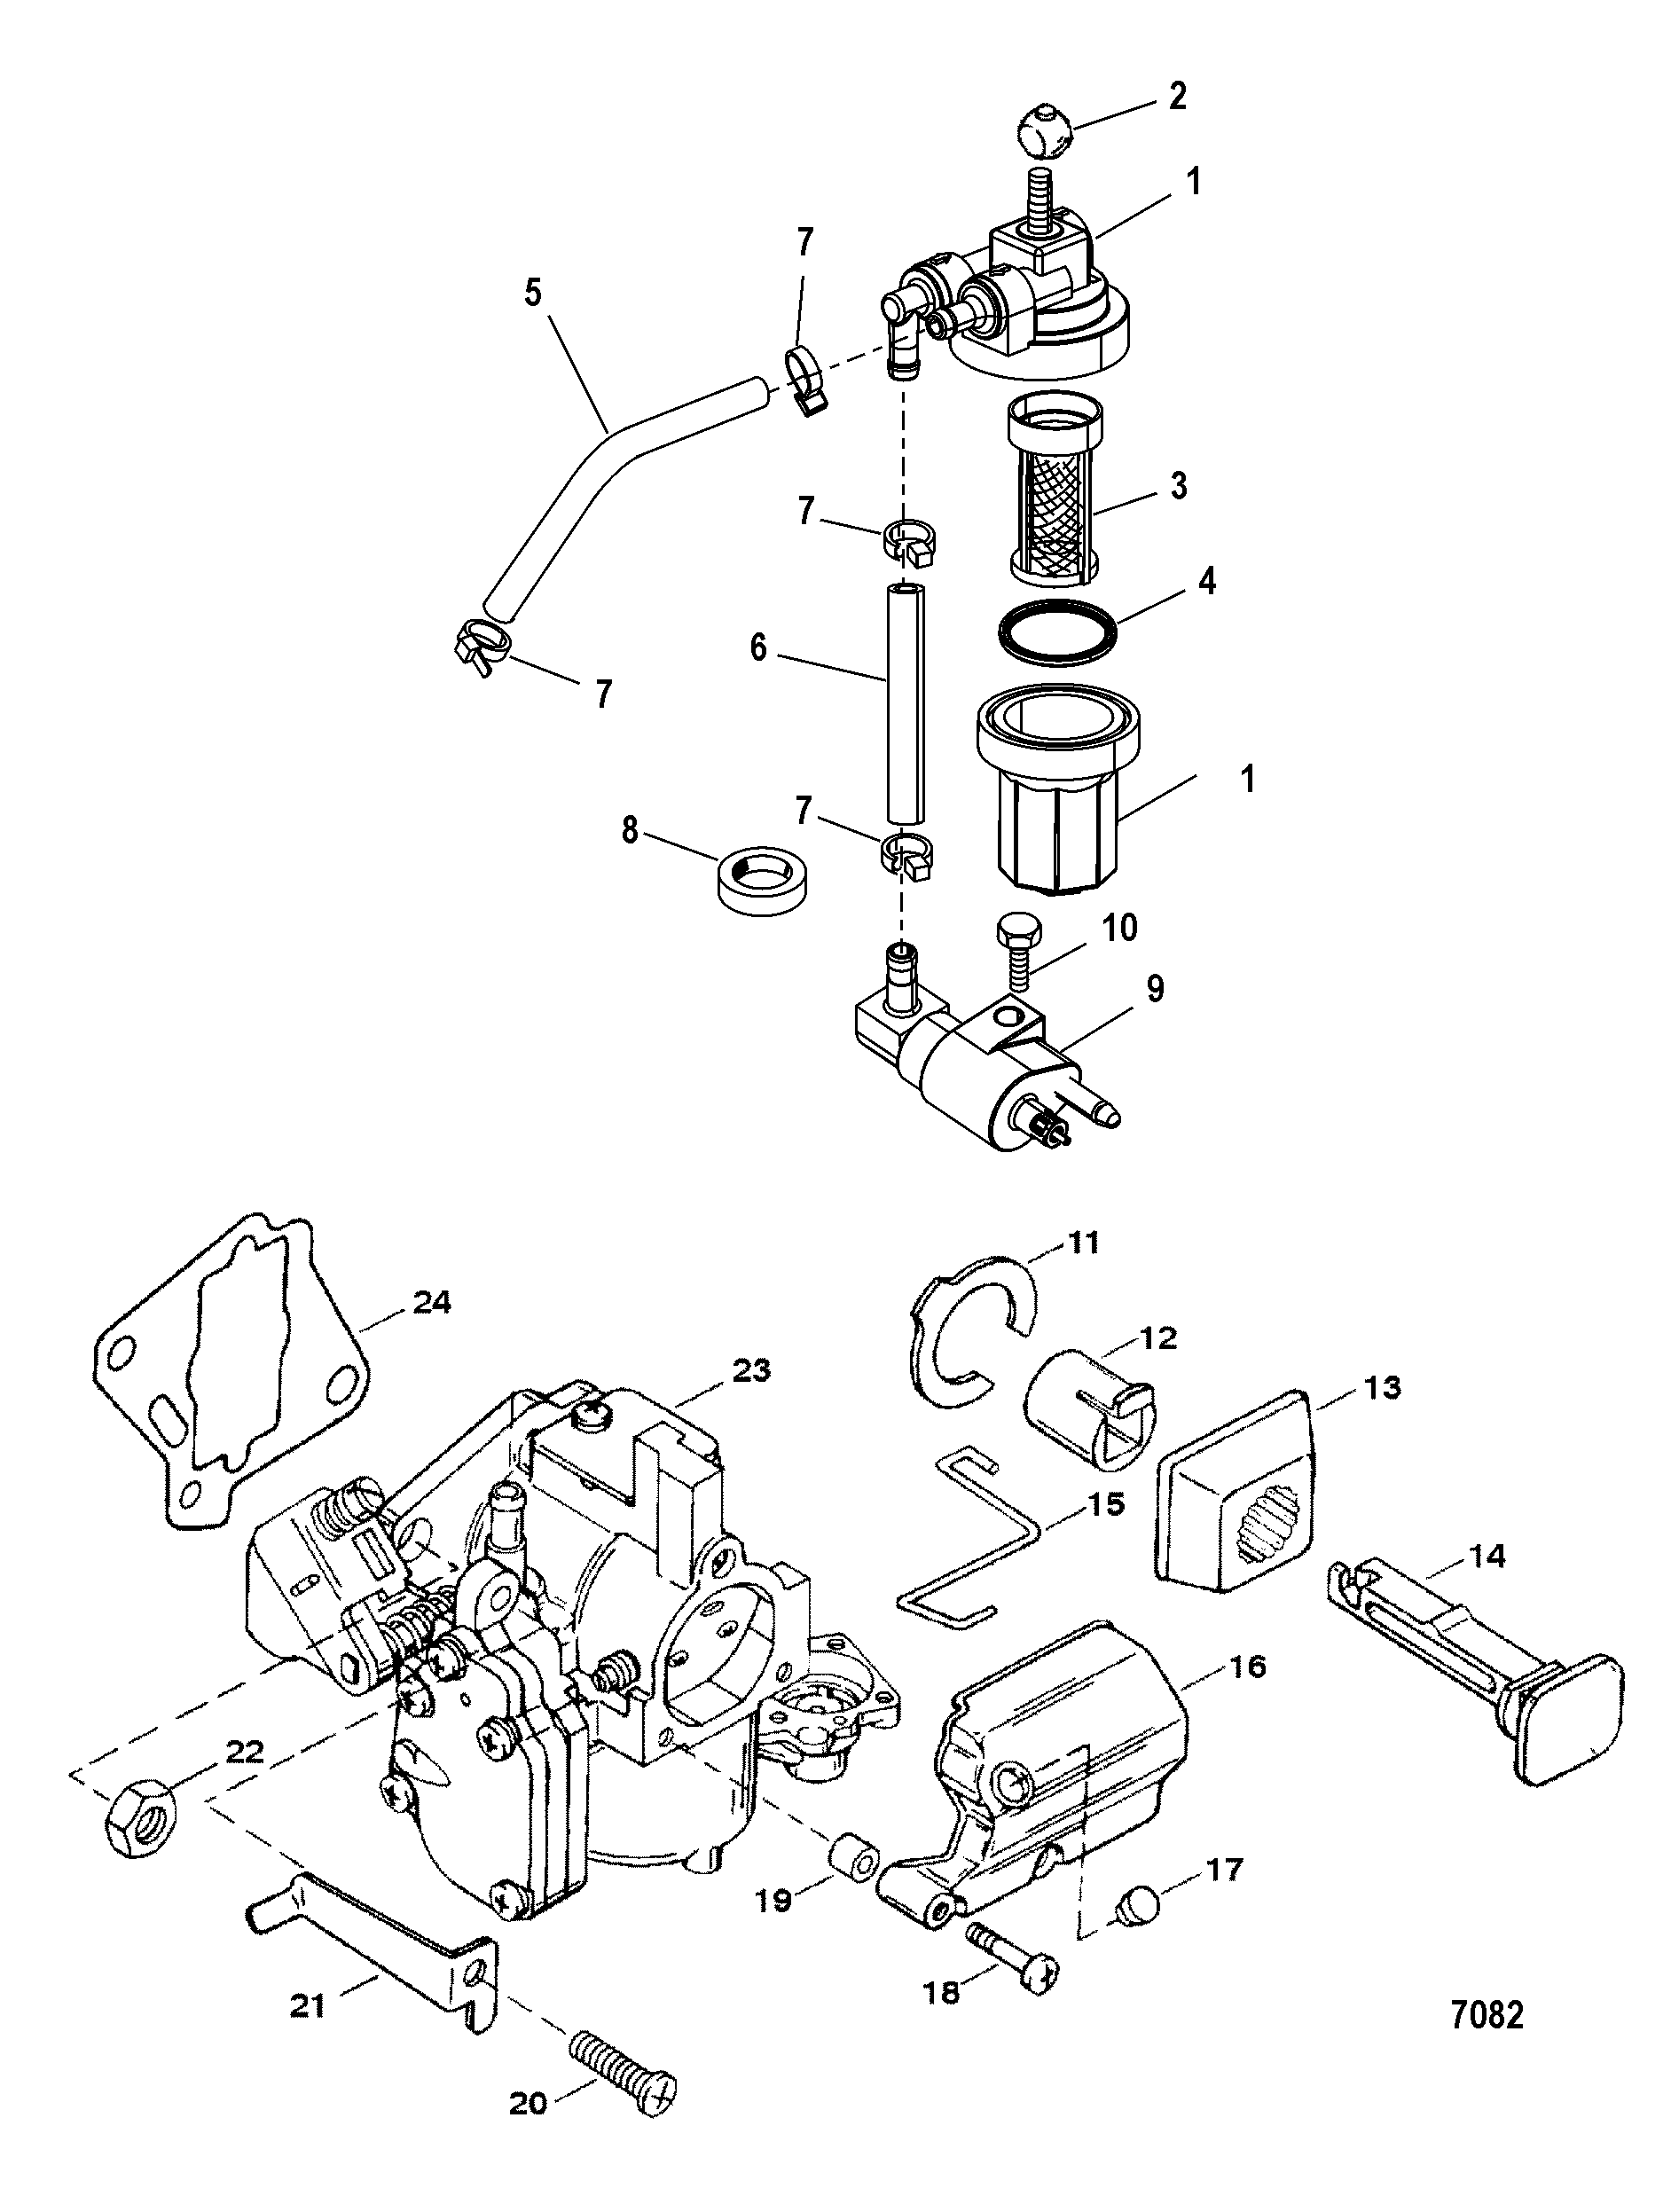 Fuel System Components(Commercial Engines)